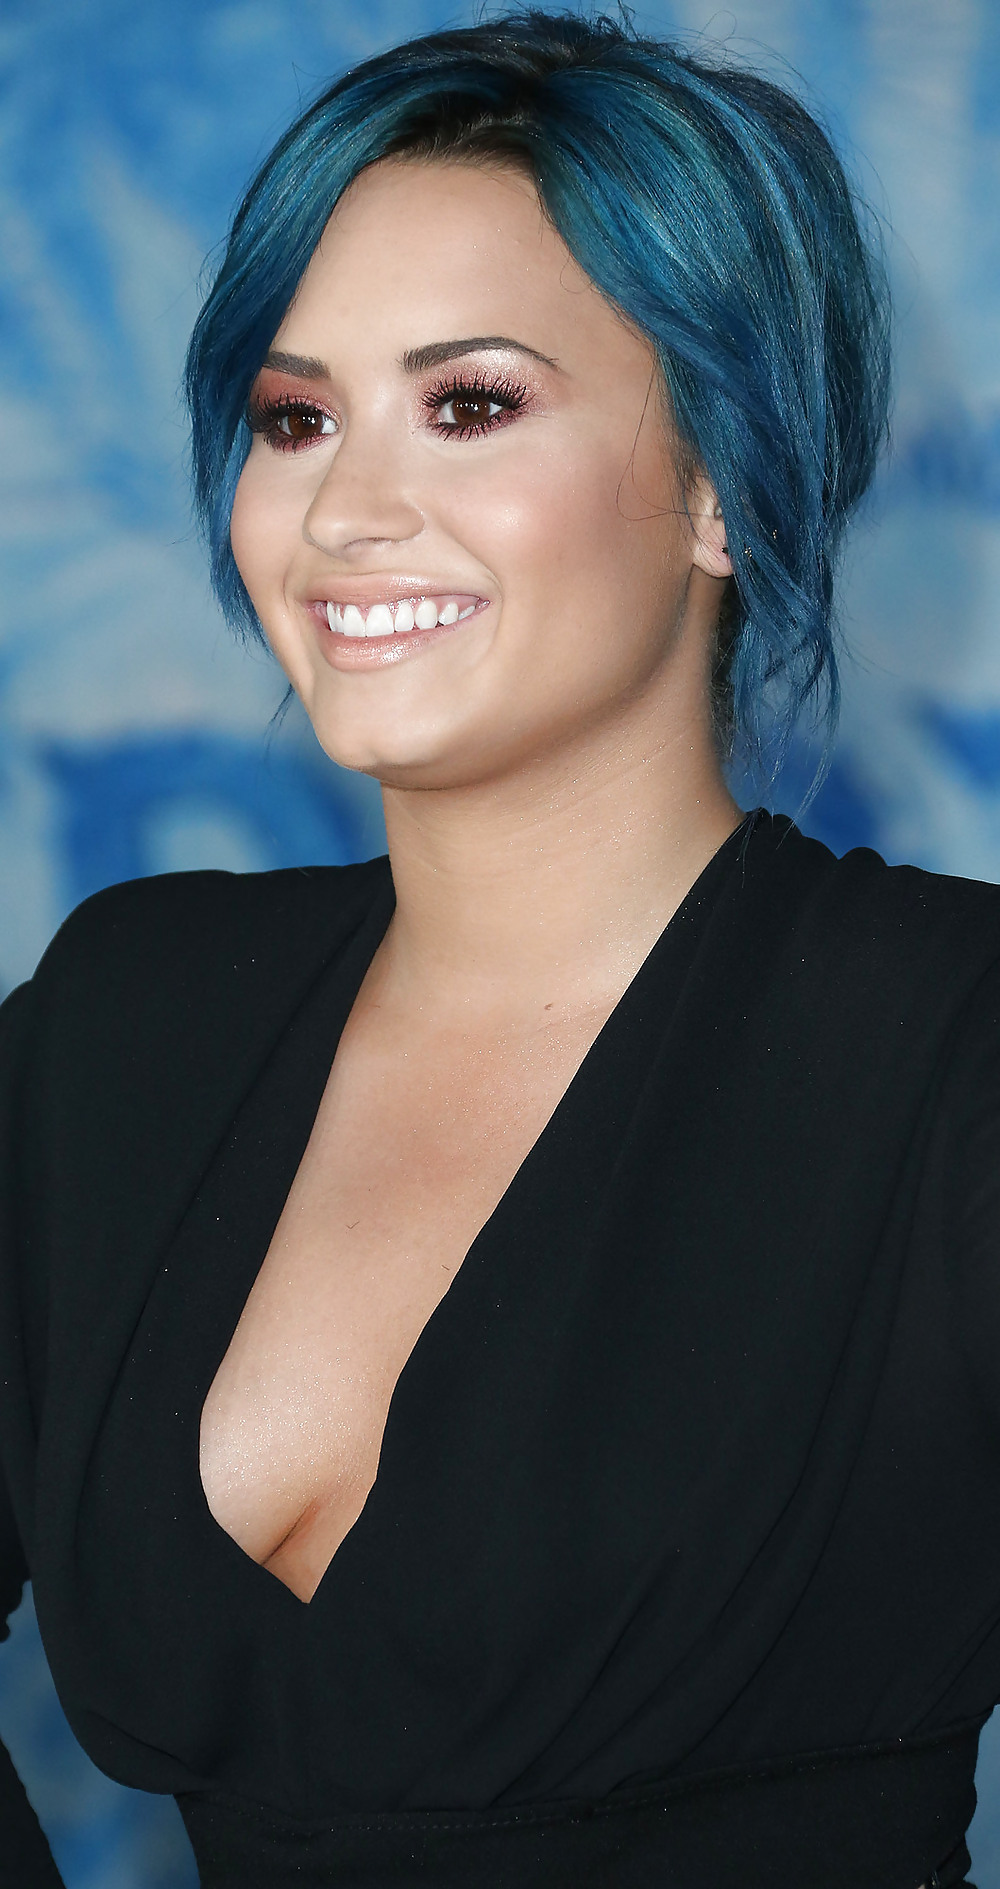 Demi Lovato with blue hair and business style #22180166